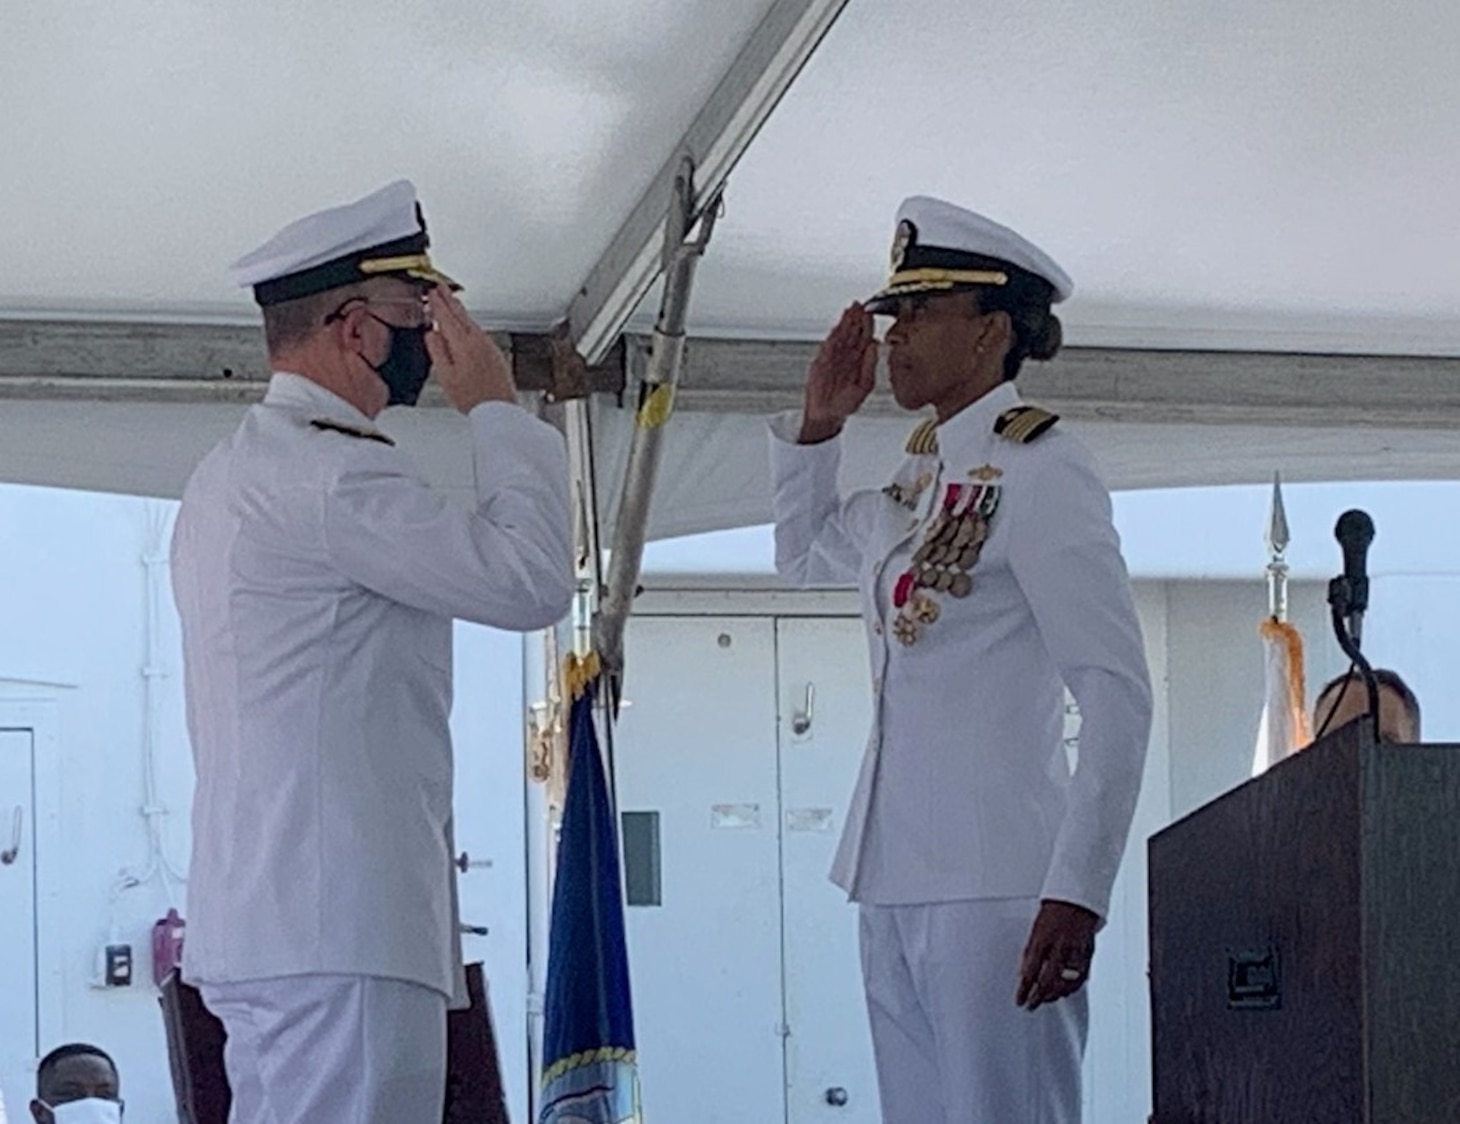 Military Sealift Command in the Atlantic (MSCLANT) changed hands when Navy Capt. Daniel E. Broadhurst relieved Navy Capt. Janice G. Smith as commodore of Norfolk-based Military Sealift Command Atlantic during a change of command ceremony held aboard USNS Comfort at Naval Station Norfolk, August 27, 2021